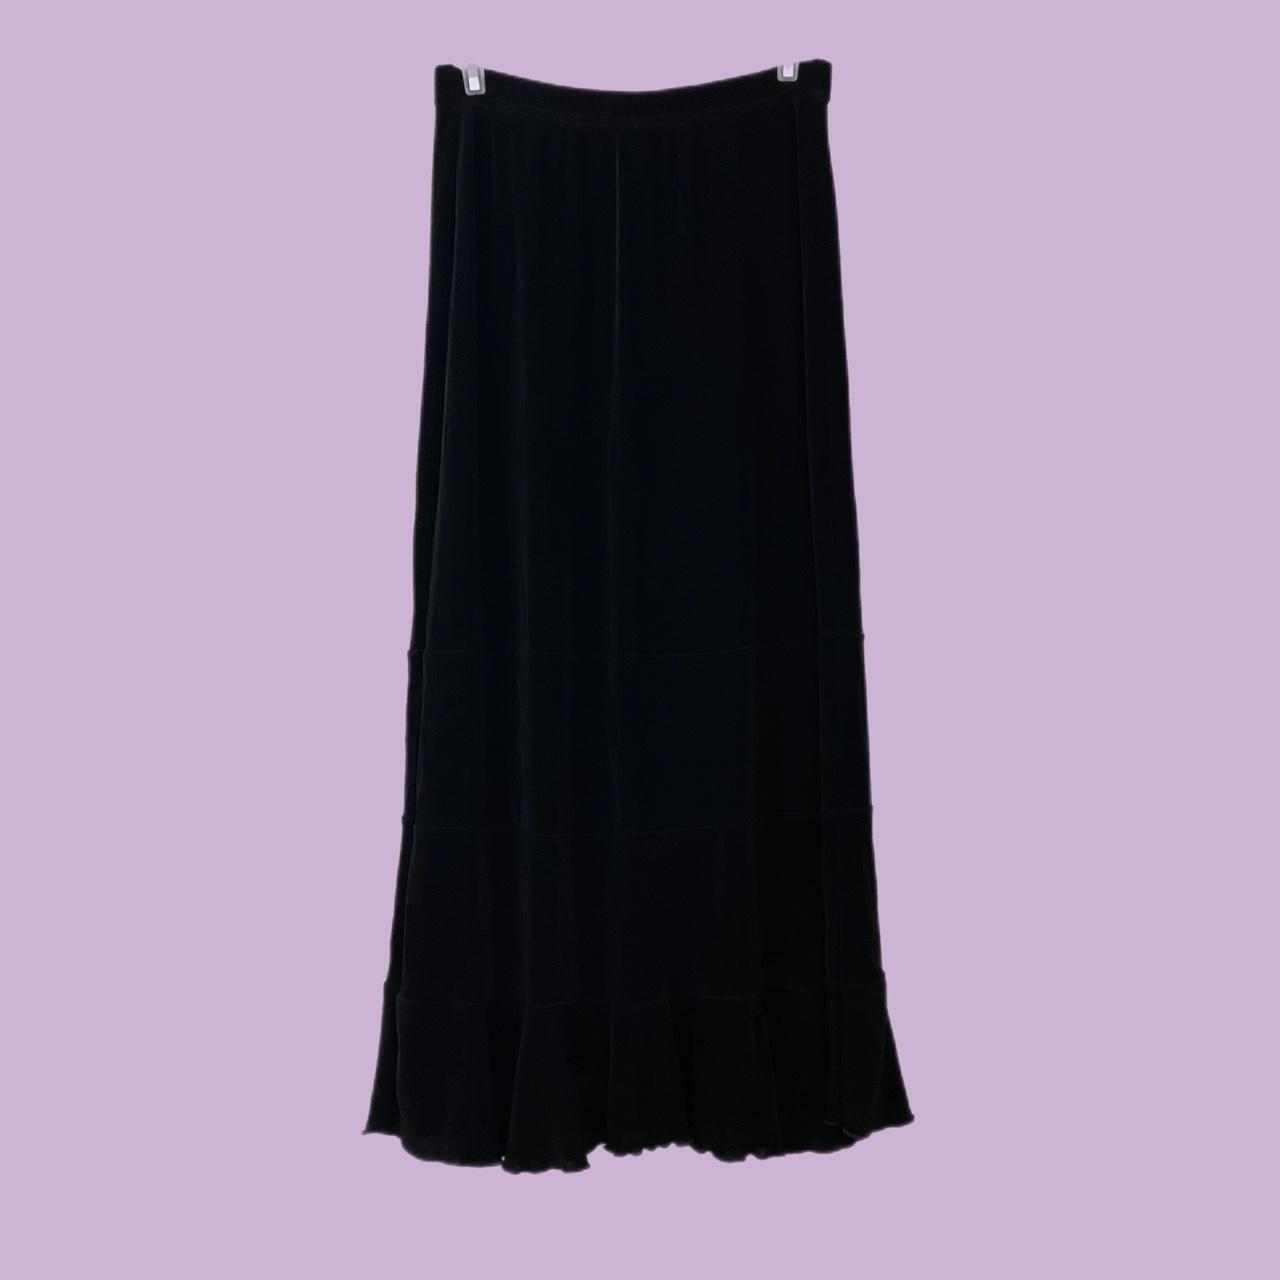 Whimsigoth black tiered slinky long maxi skirt Size... - Depop